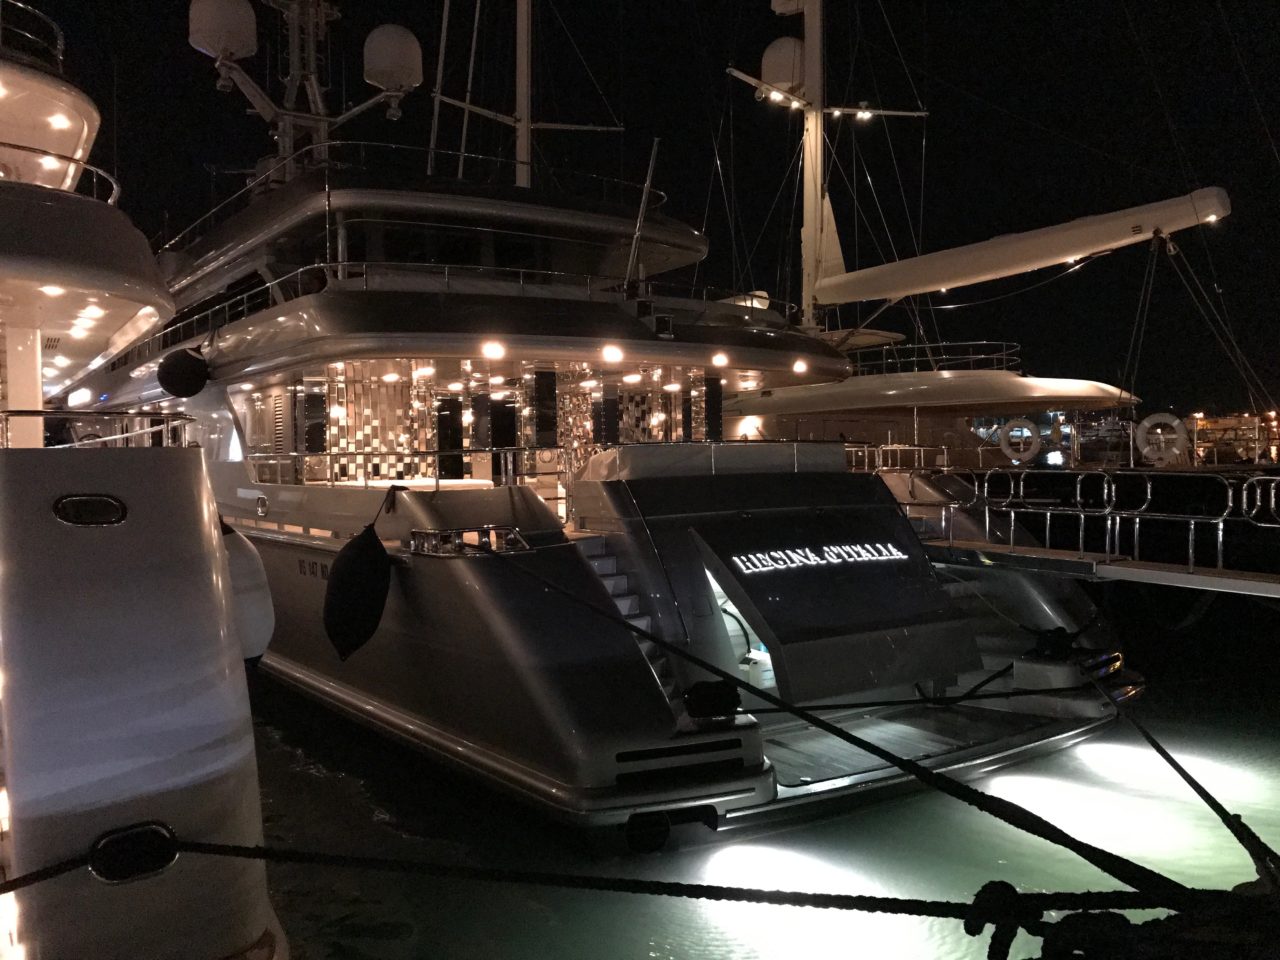 Luxury Yacht Docked At Harbor With Lights